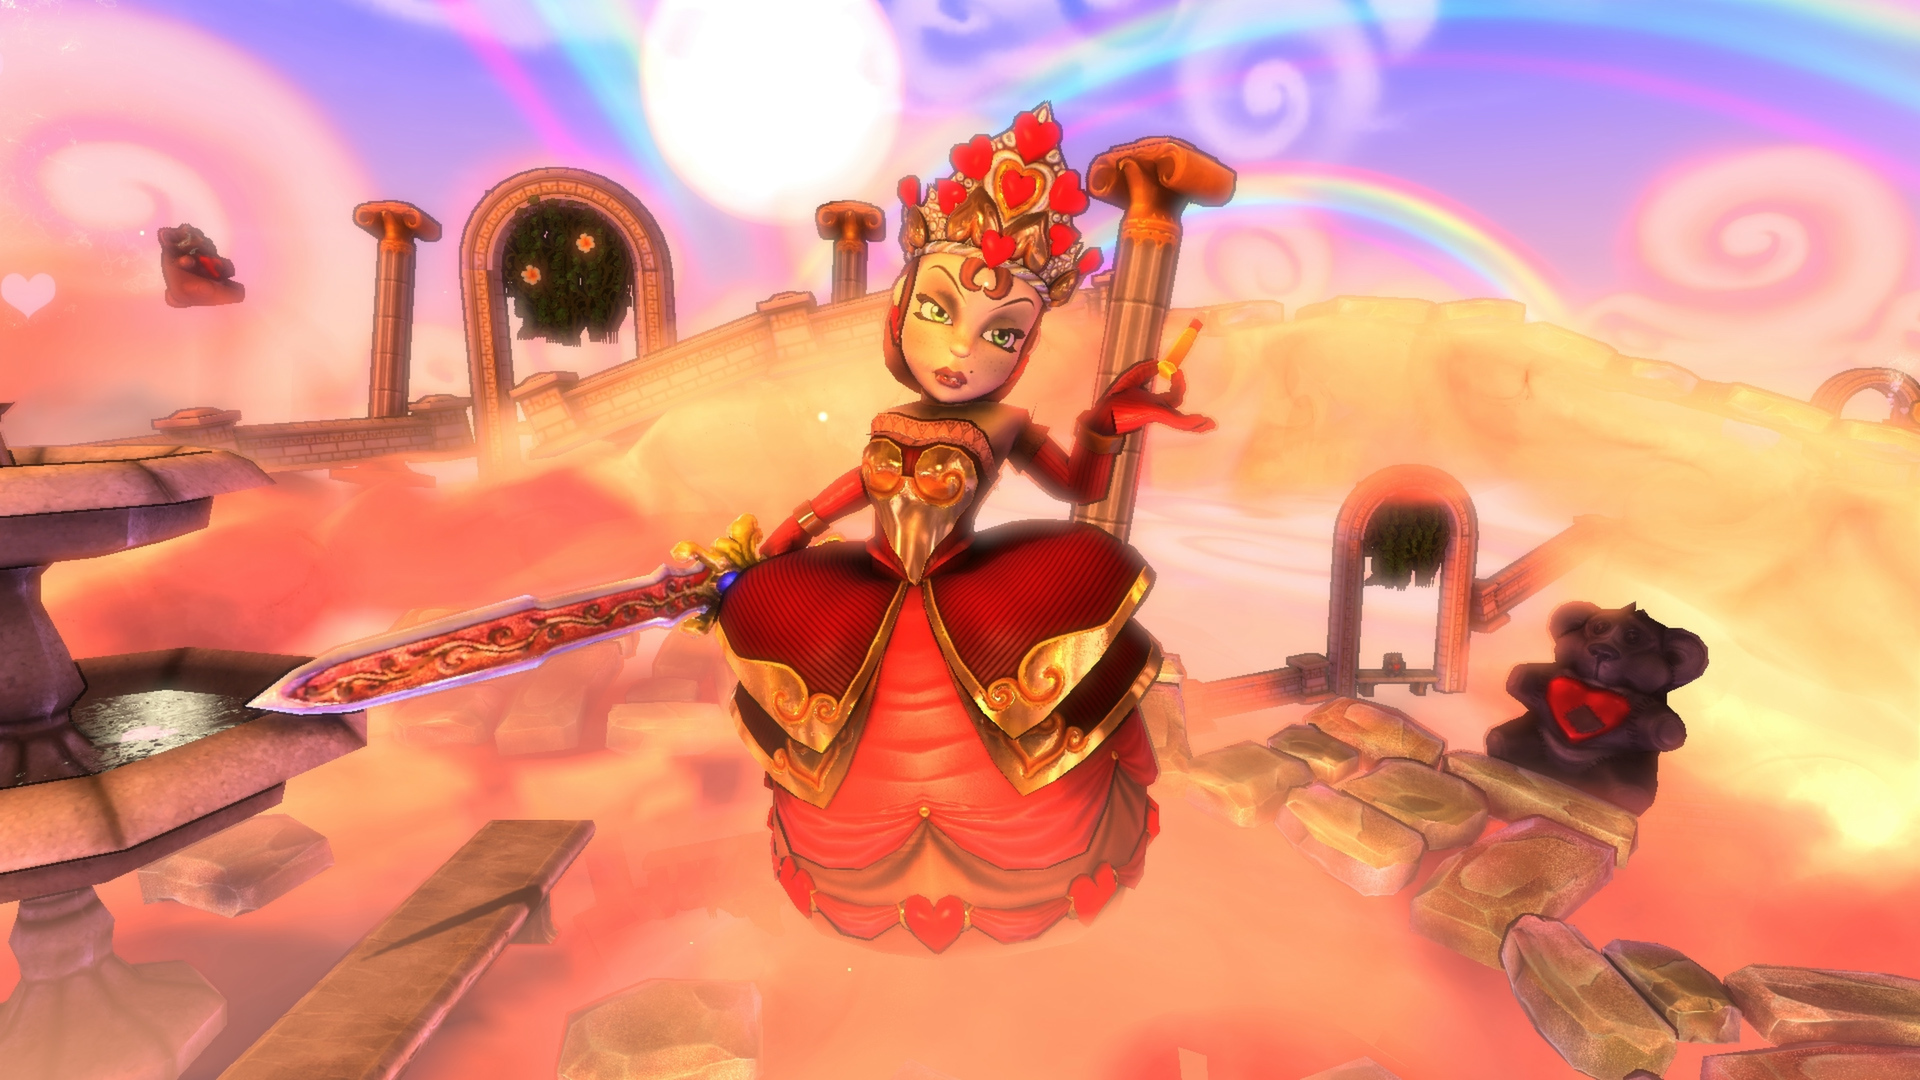 Dungeon Defenders: Etherian Festival of Love Featured Screenshot #1